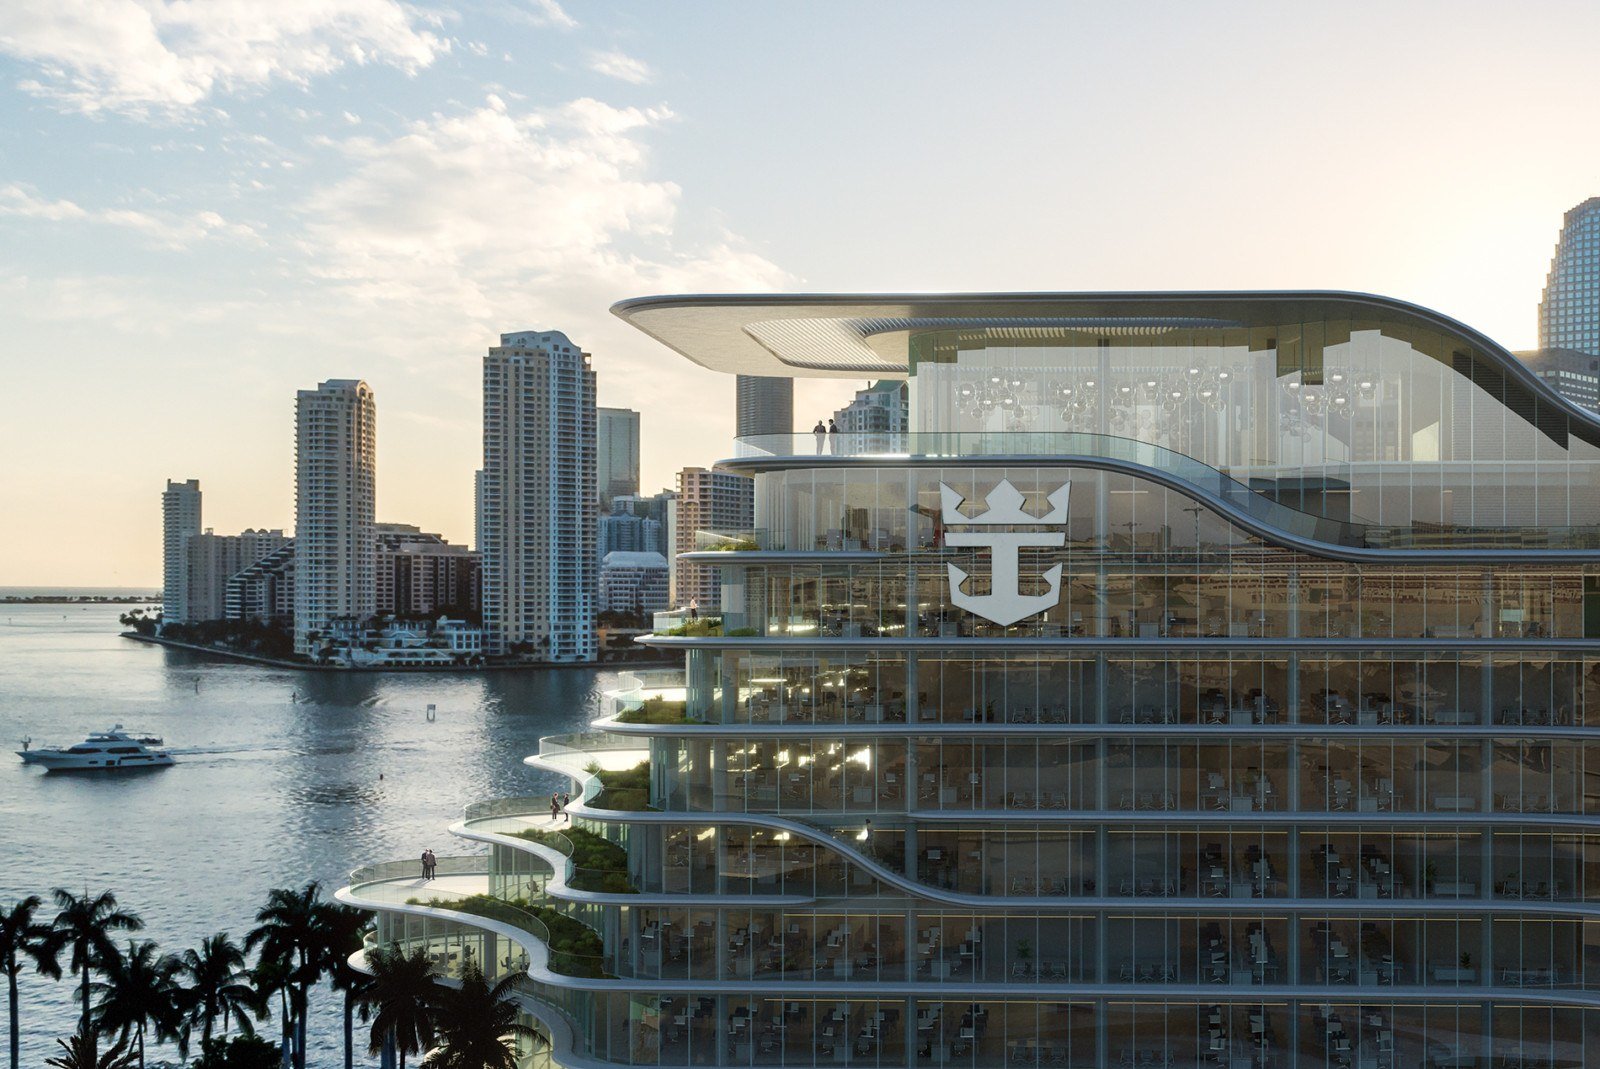 Royal Caribbean has paused construction on its new Miami headquarters